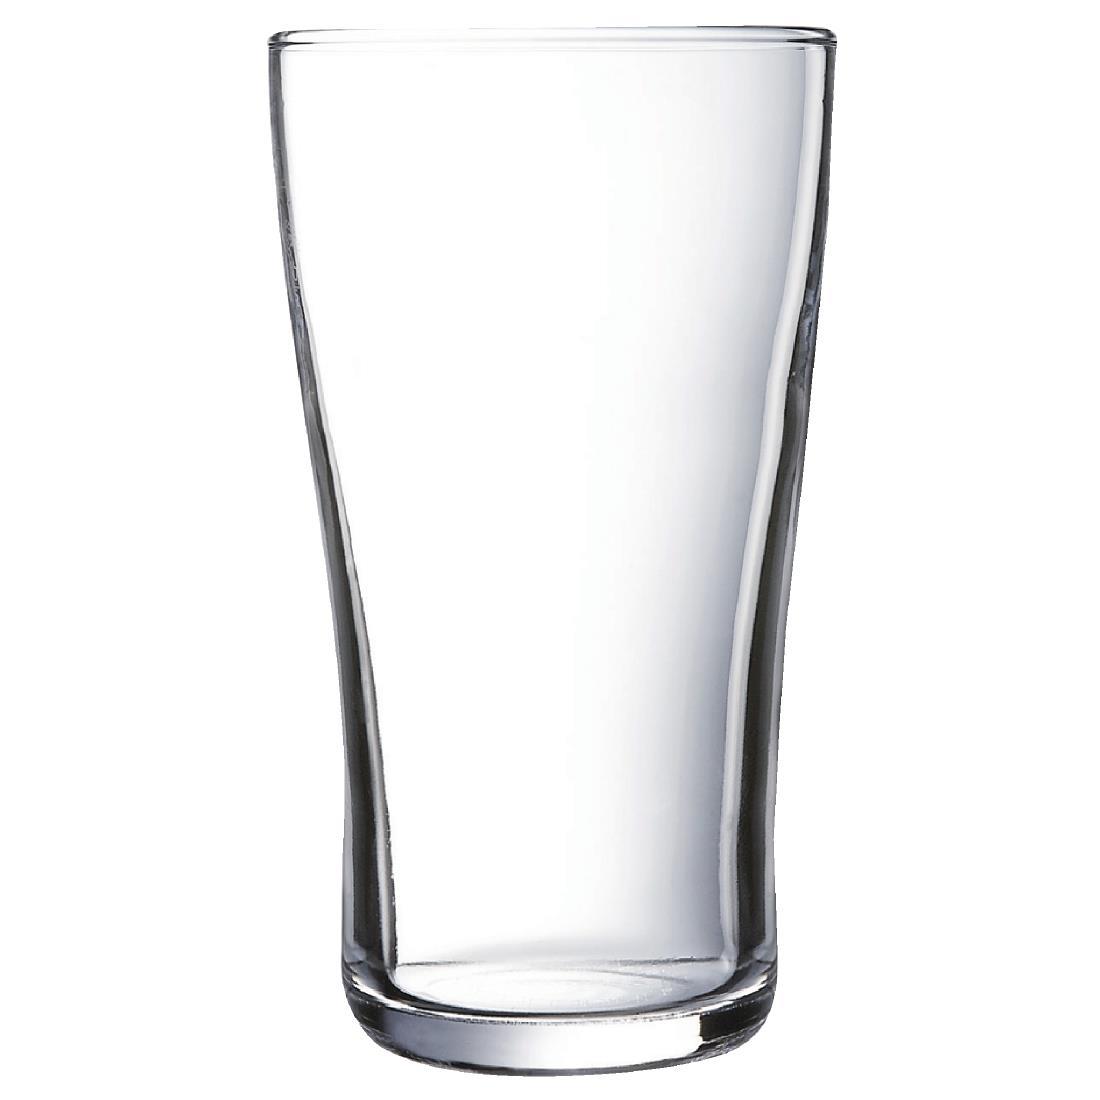 Arcoroc Ultimate Beer Glasses 570ml CE Marked (Pack of 36) - GC541  - 1